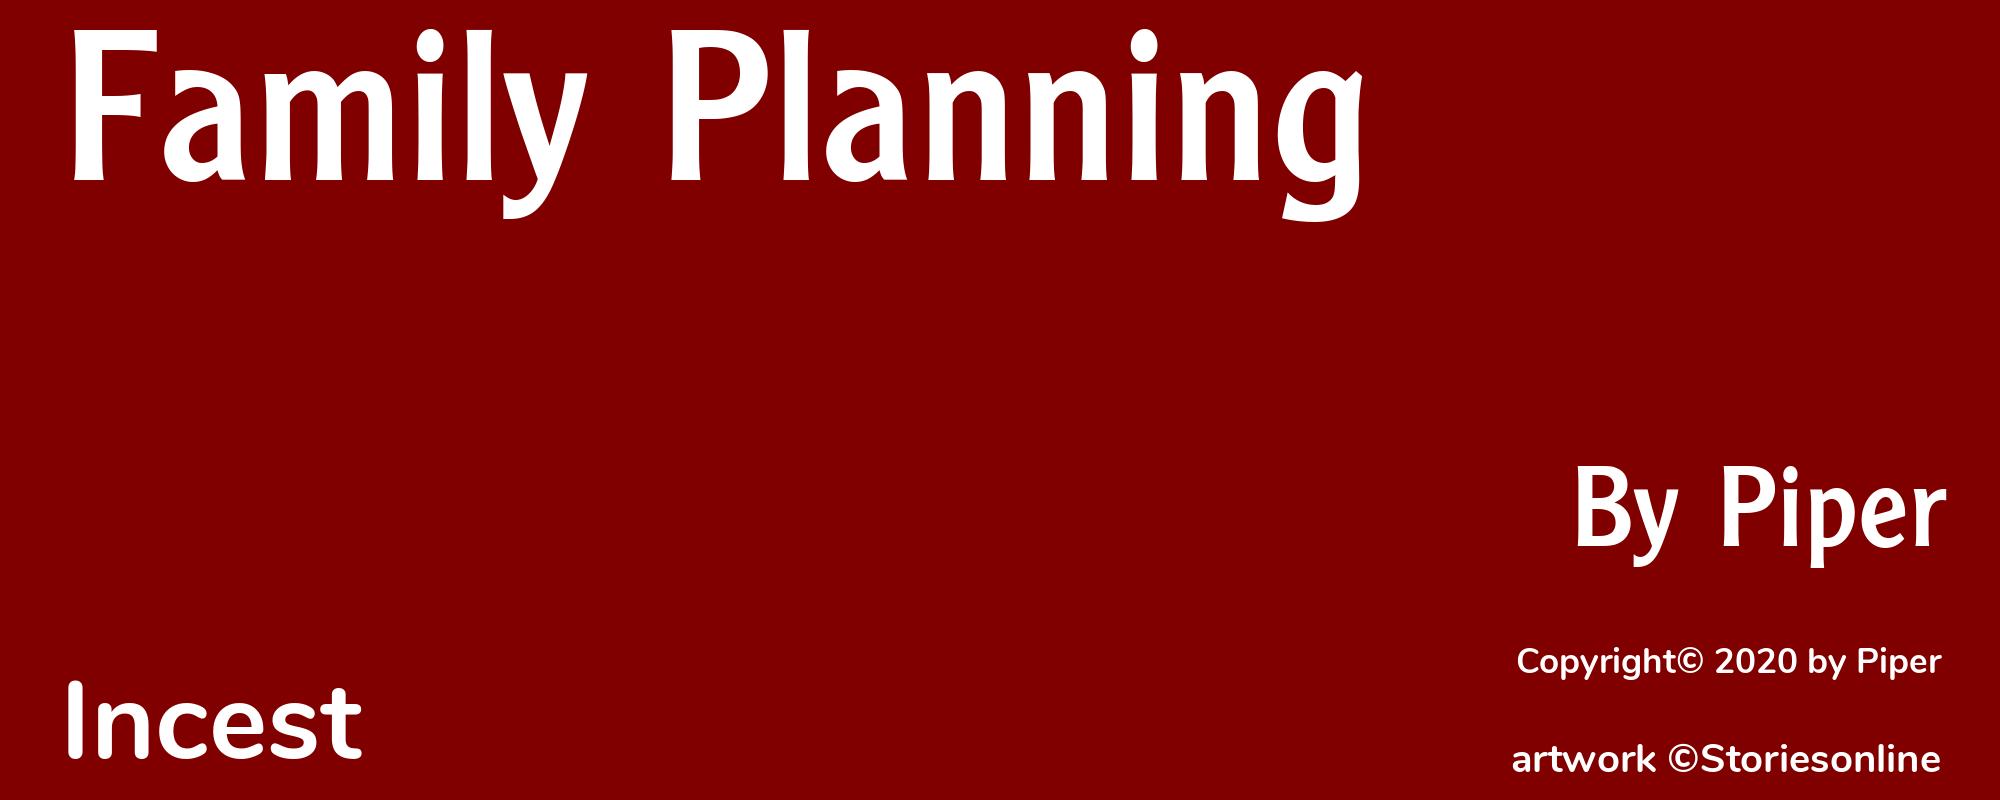 Family Planning - Cover